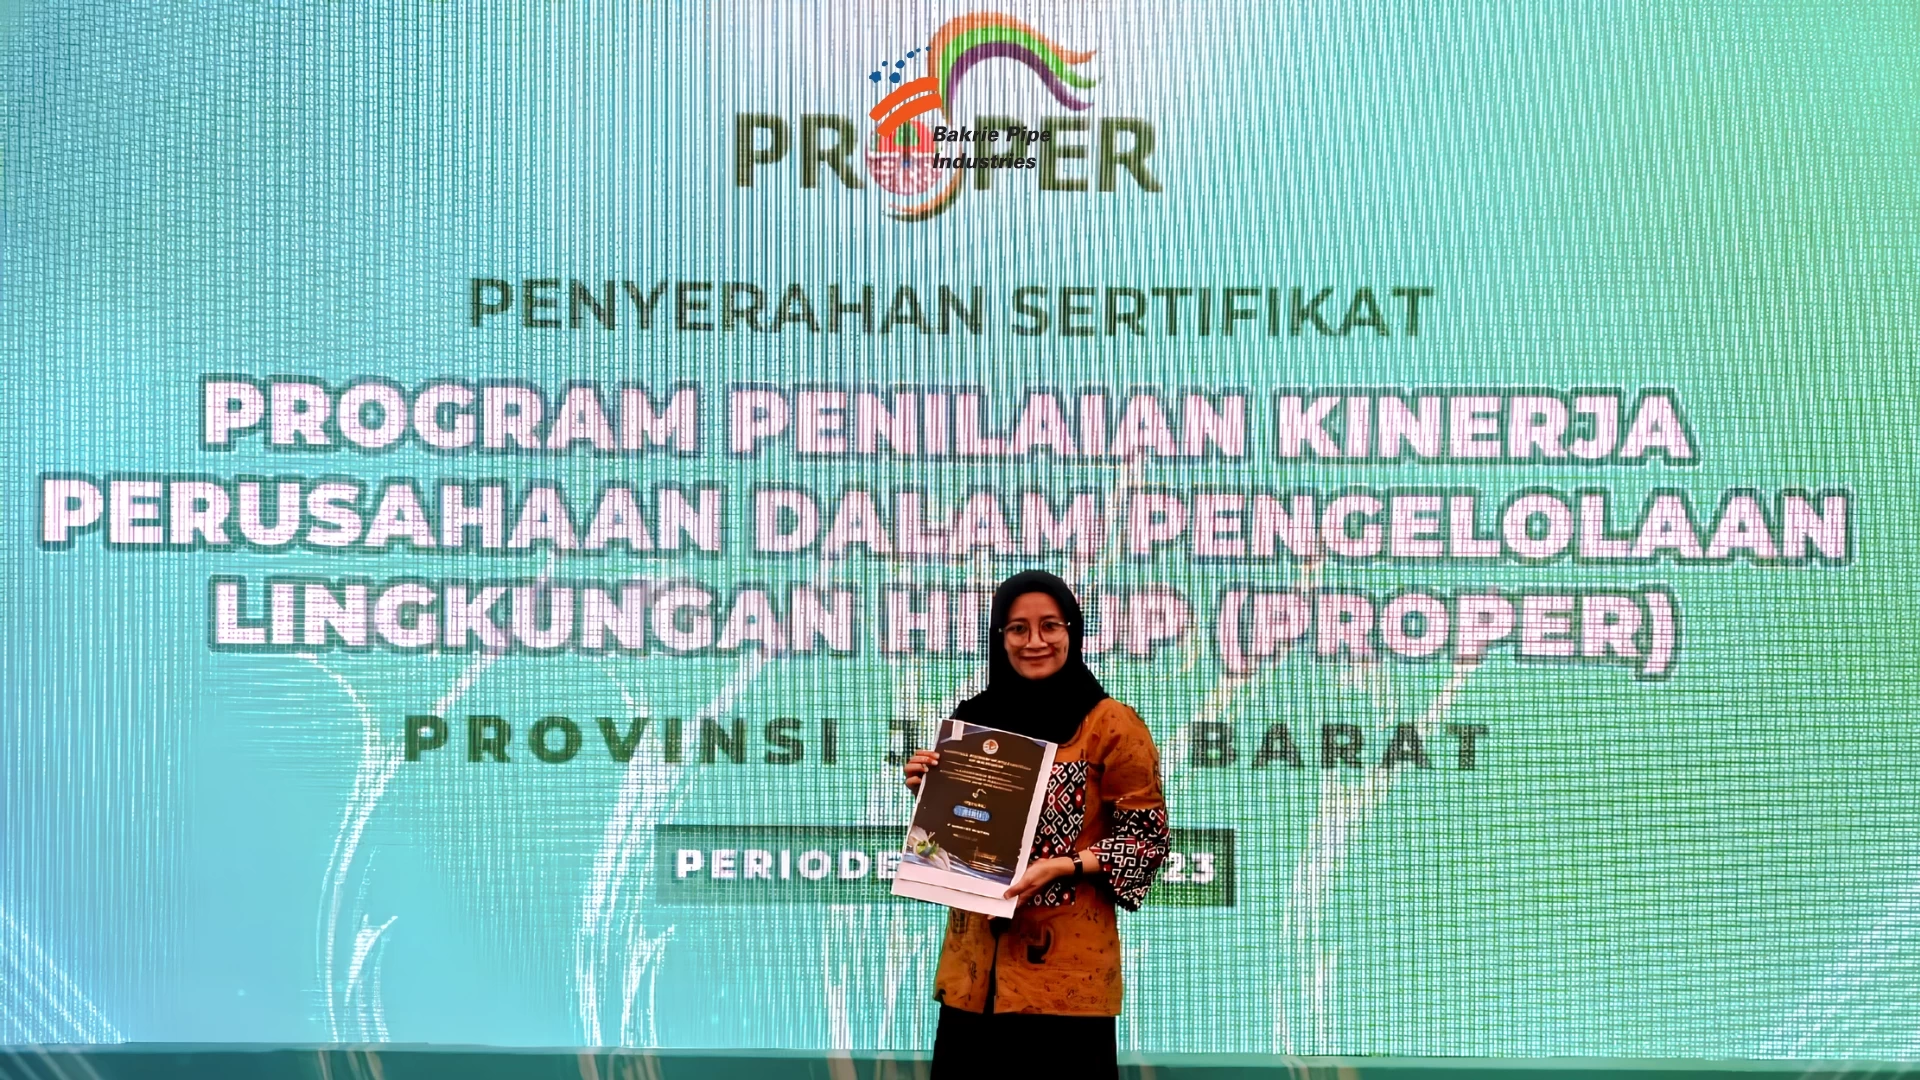 PT Bakrie Pipe Industries Won the Blue Award in the 2022-2023 Company Performance Rating Assessment Program in Environmental Management (PROPER).